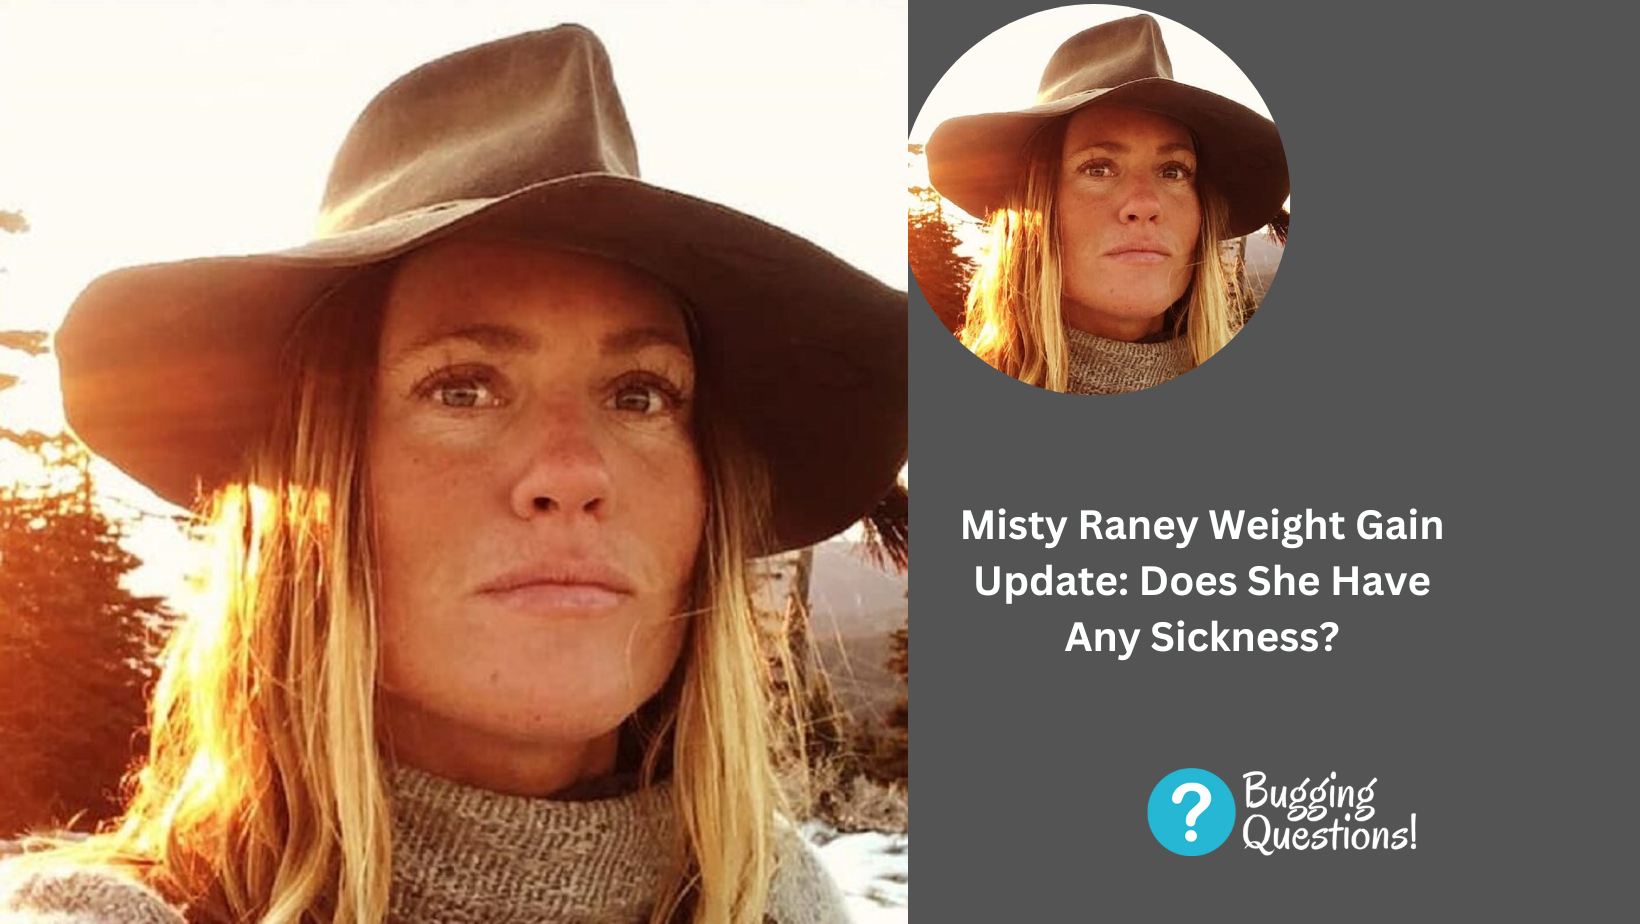 Misty Raney Weight Gain Update: Does She Have Any Sickness?